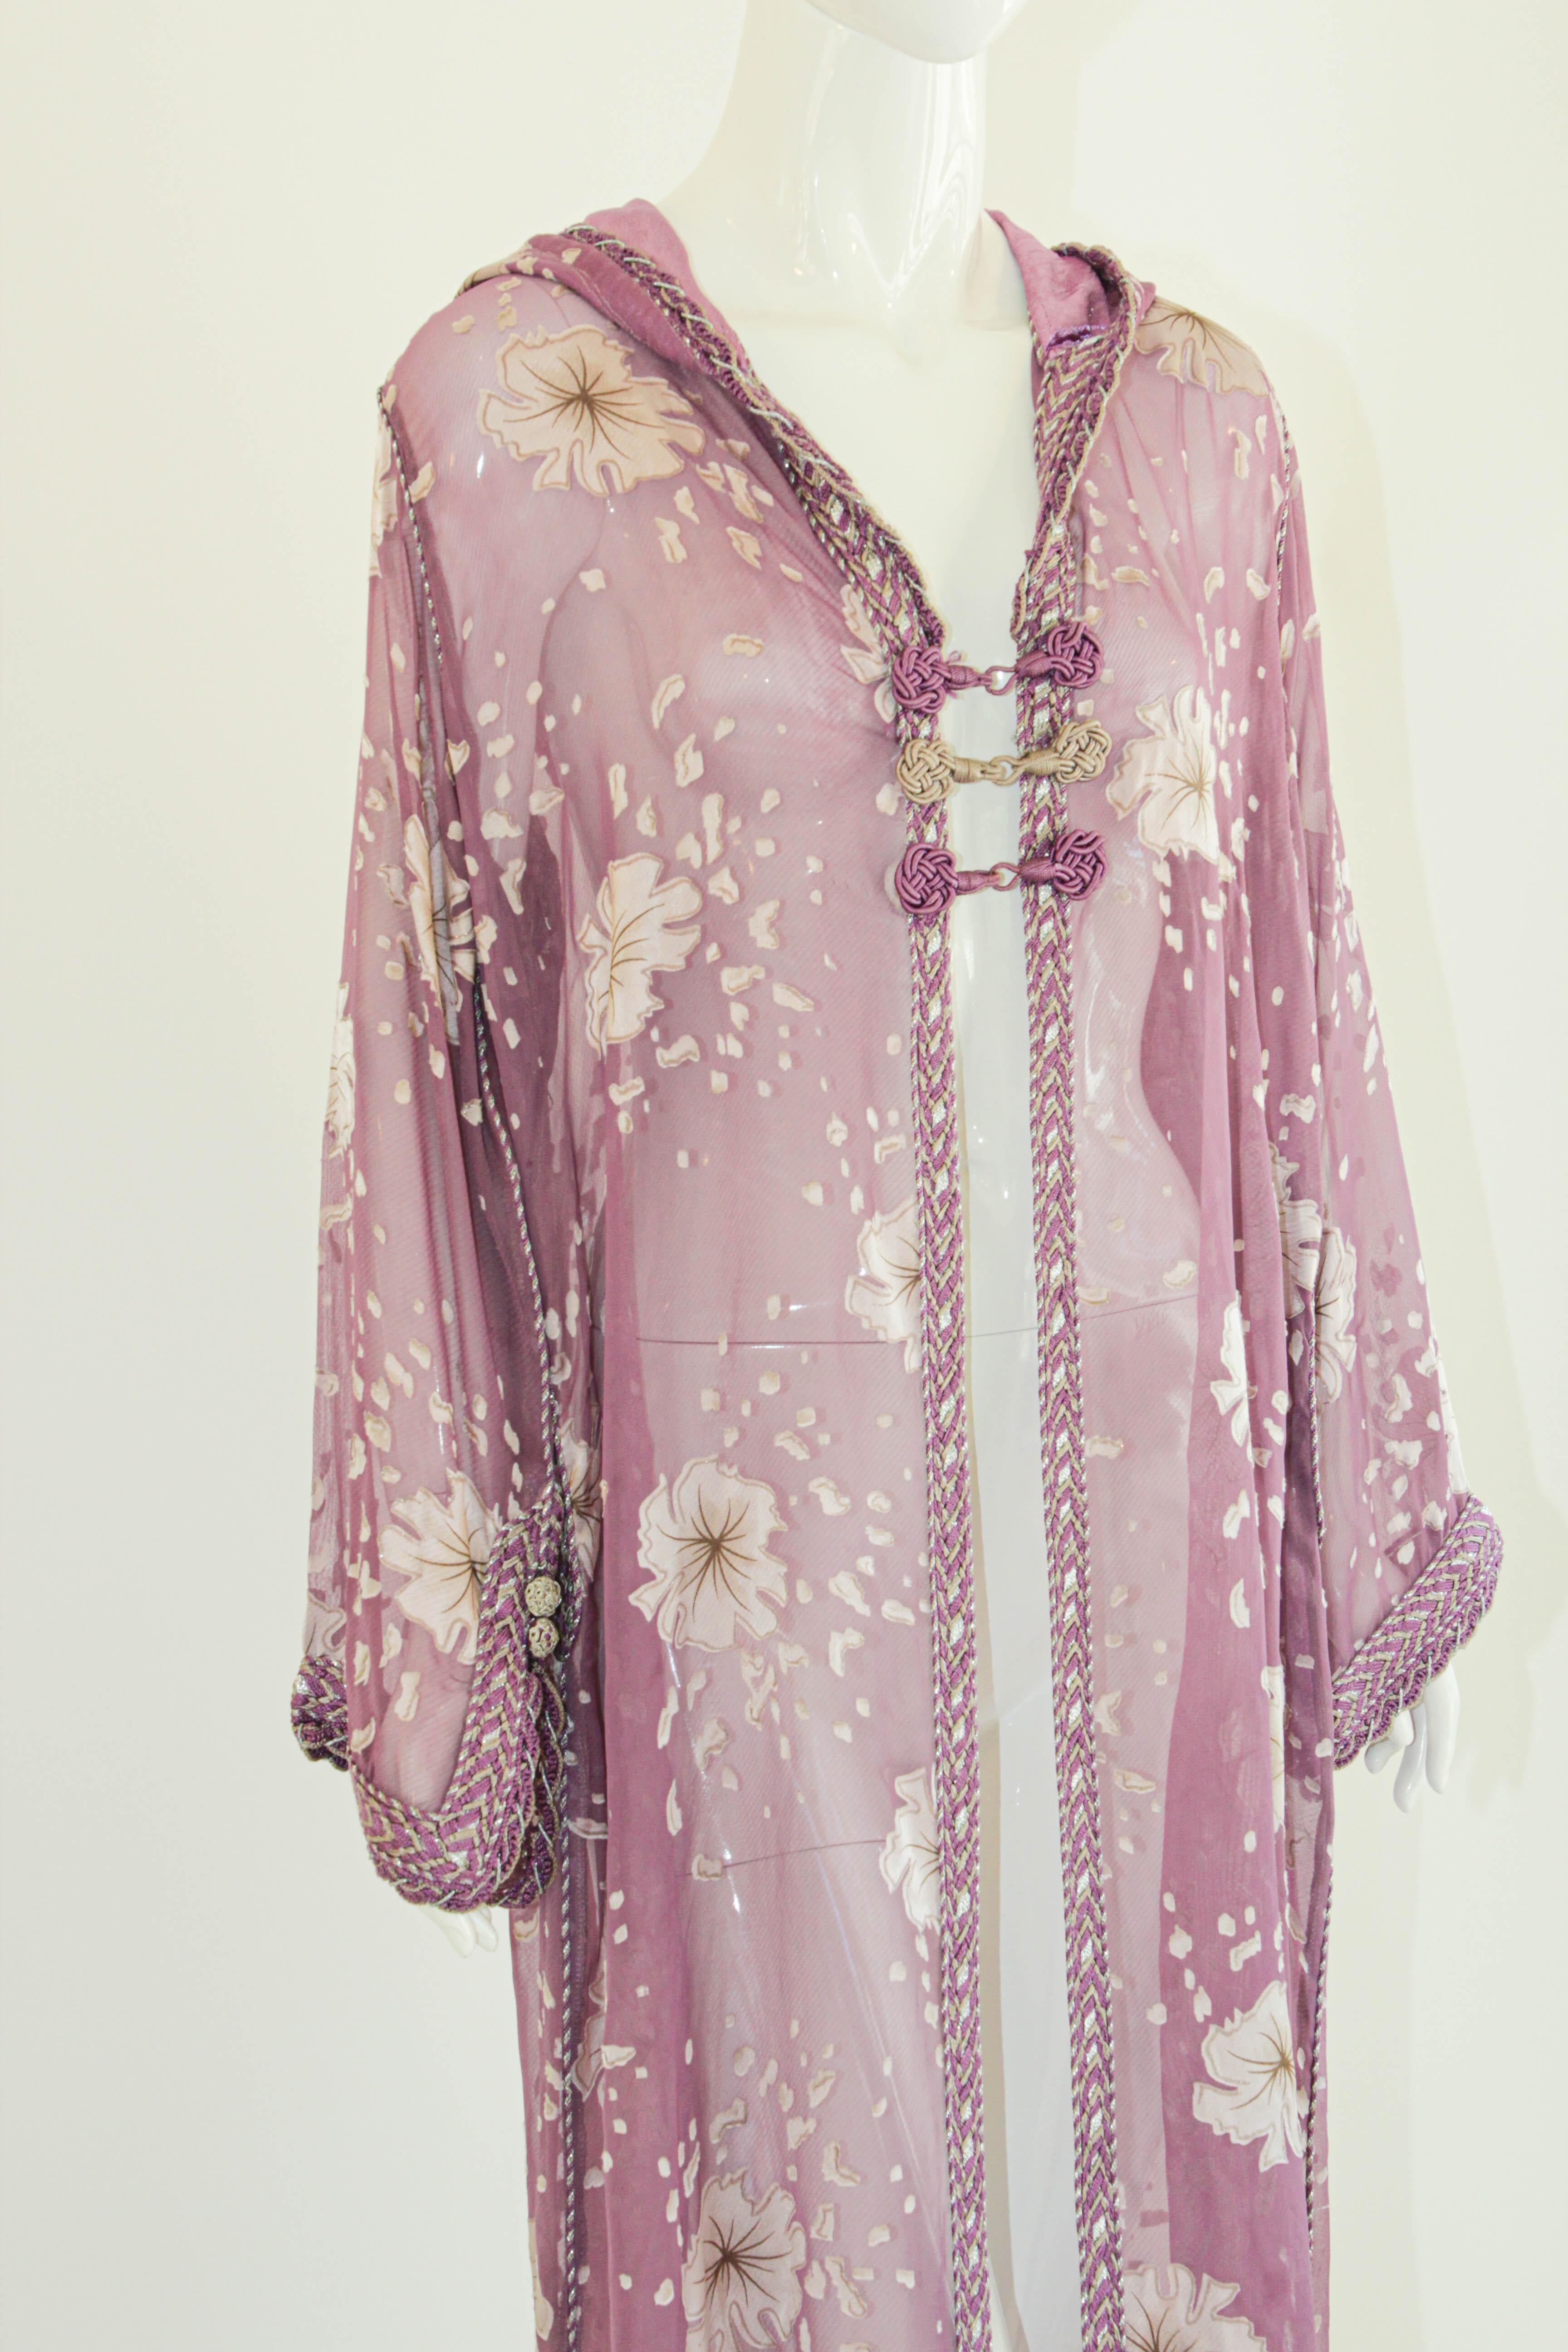 Moroccan Lavender Kaftan Maxi Dress Hooded Vintage Caftan In Good Condition For Sale In North Hollywood, CA